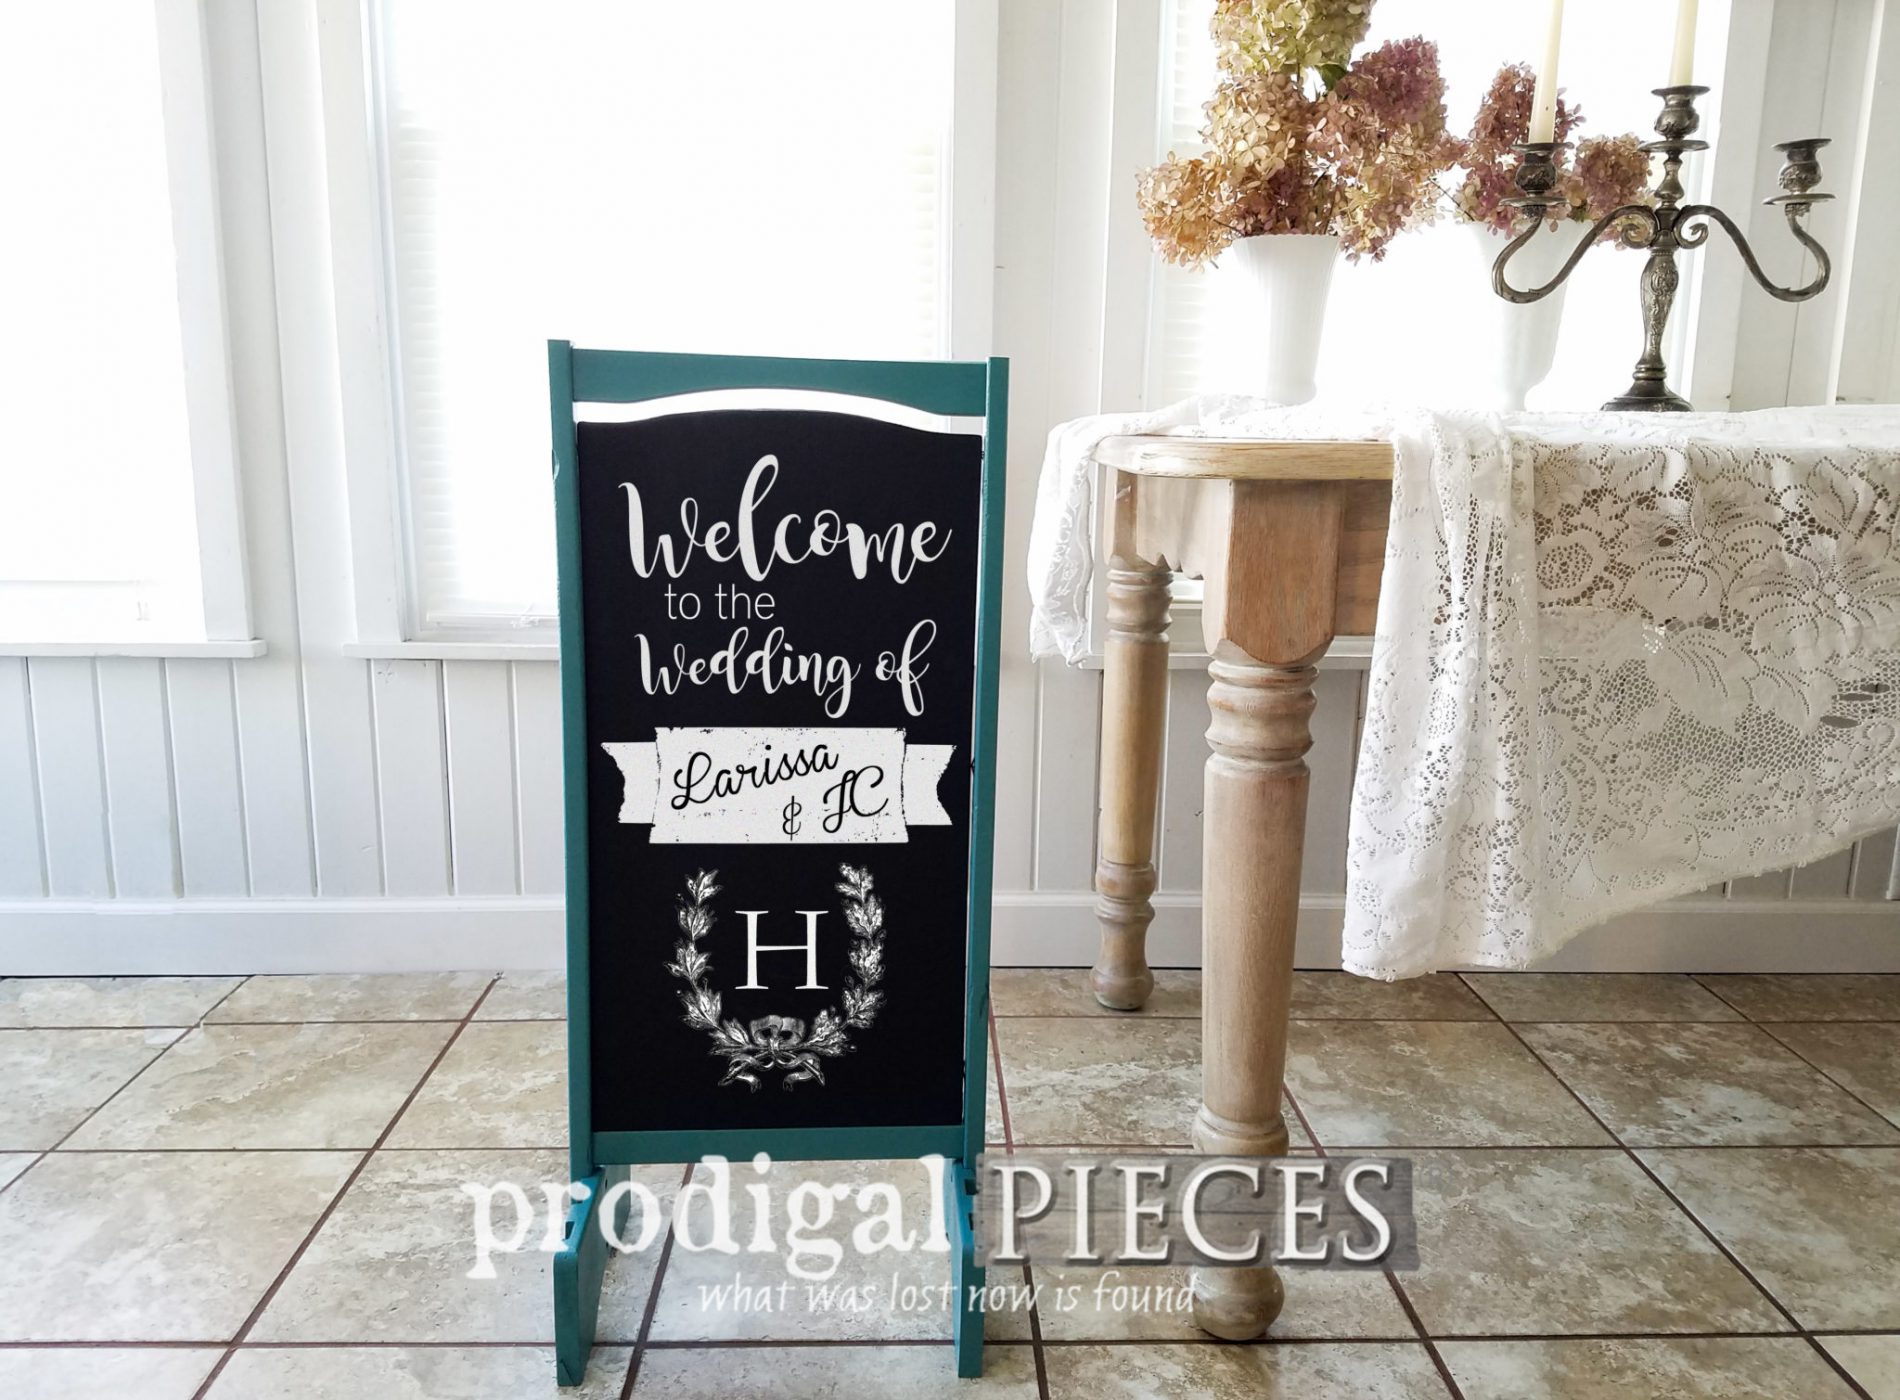 Featured Repurposed Upcycled Chalkboard Signs from Curbside Finds by Prodigal Pieces | prodigalpieces.com